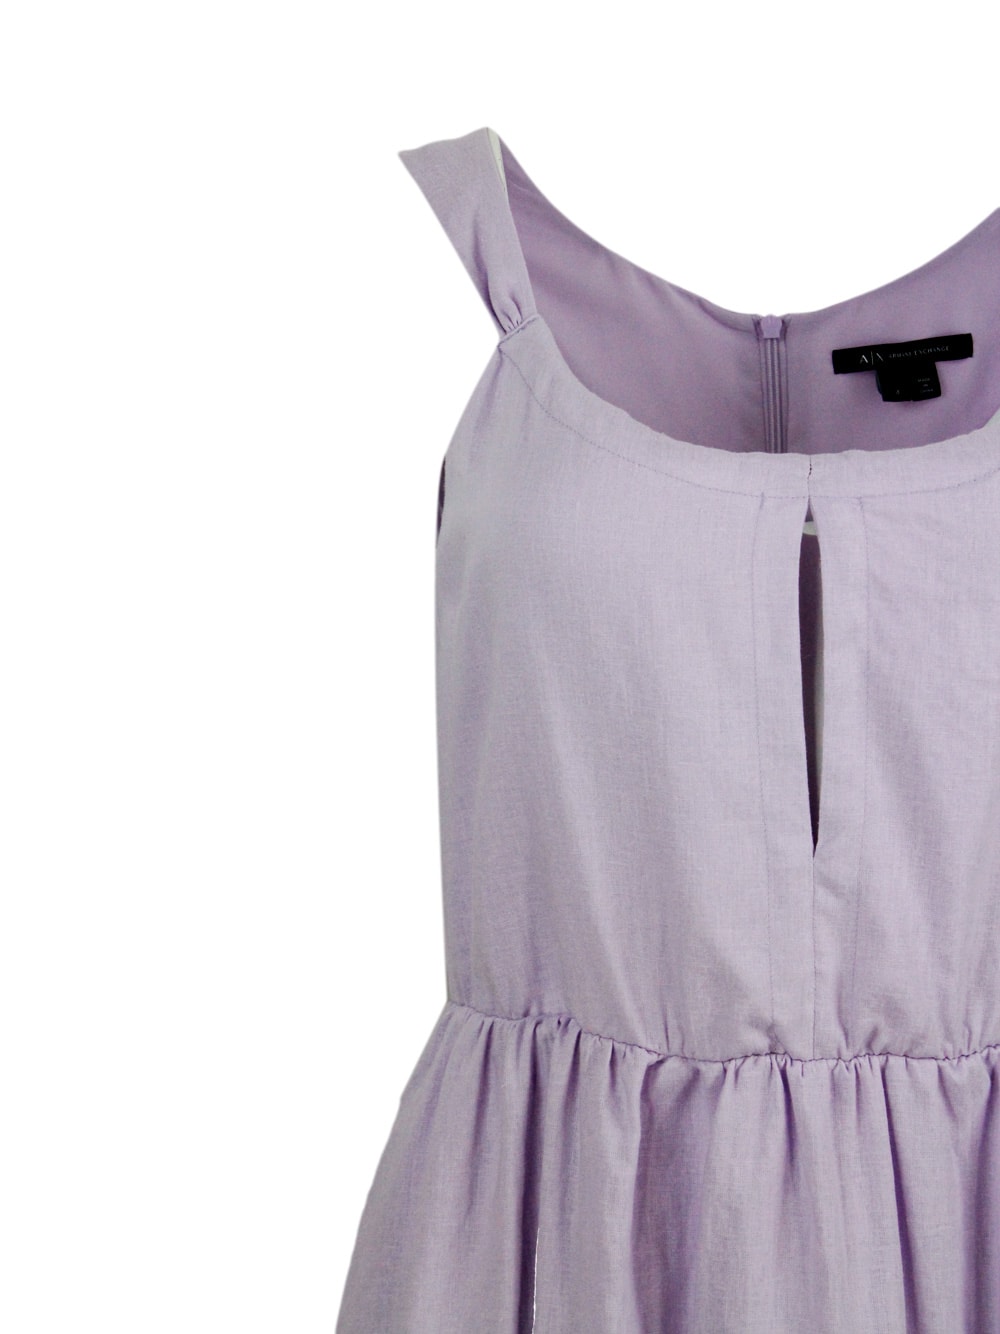 Shop Armani Collezioni Sleeveless Dress Made Of Linen Blend With Elastic Gathering At The Waist. Welt Pockets In Pink